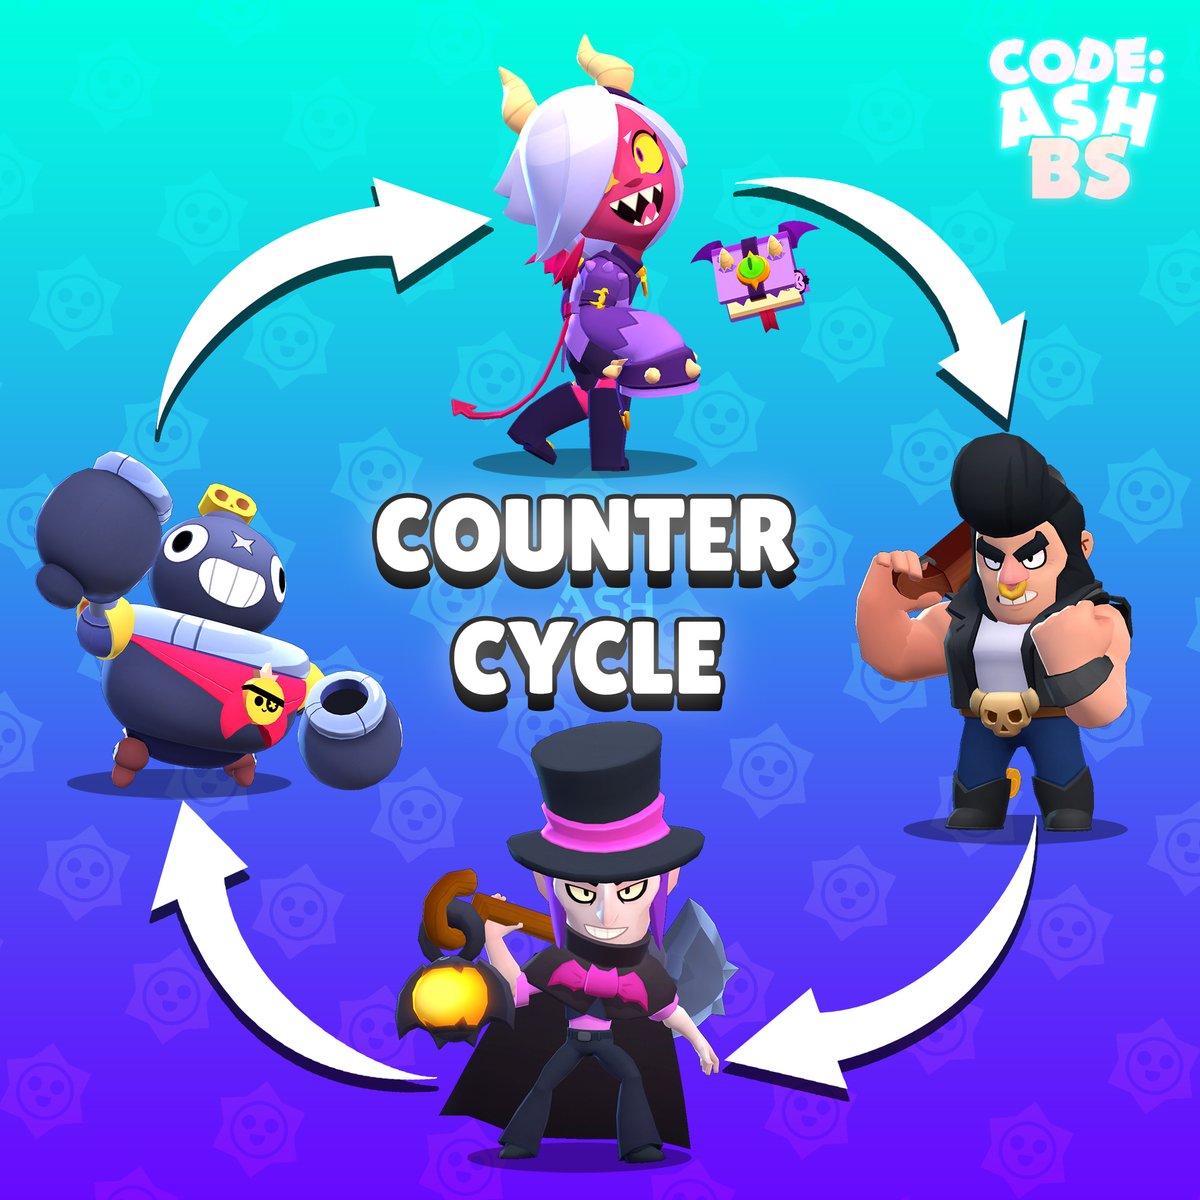 Code Ashbs On Twitter Credit To Limonsalmon For The Idea To This Graphic - brawl stars luna idea